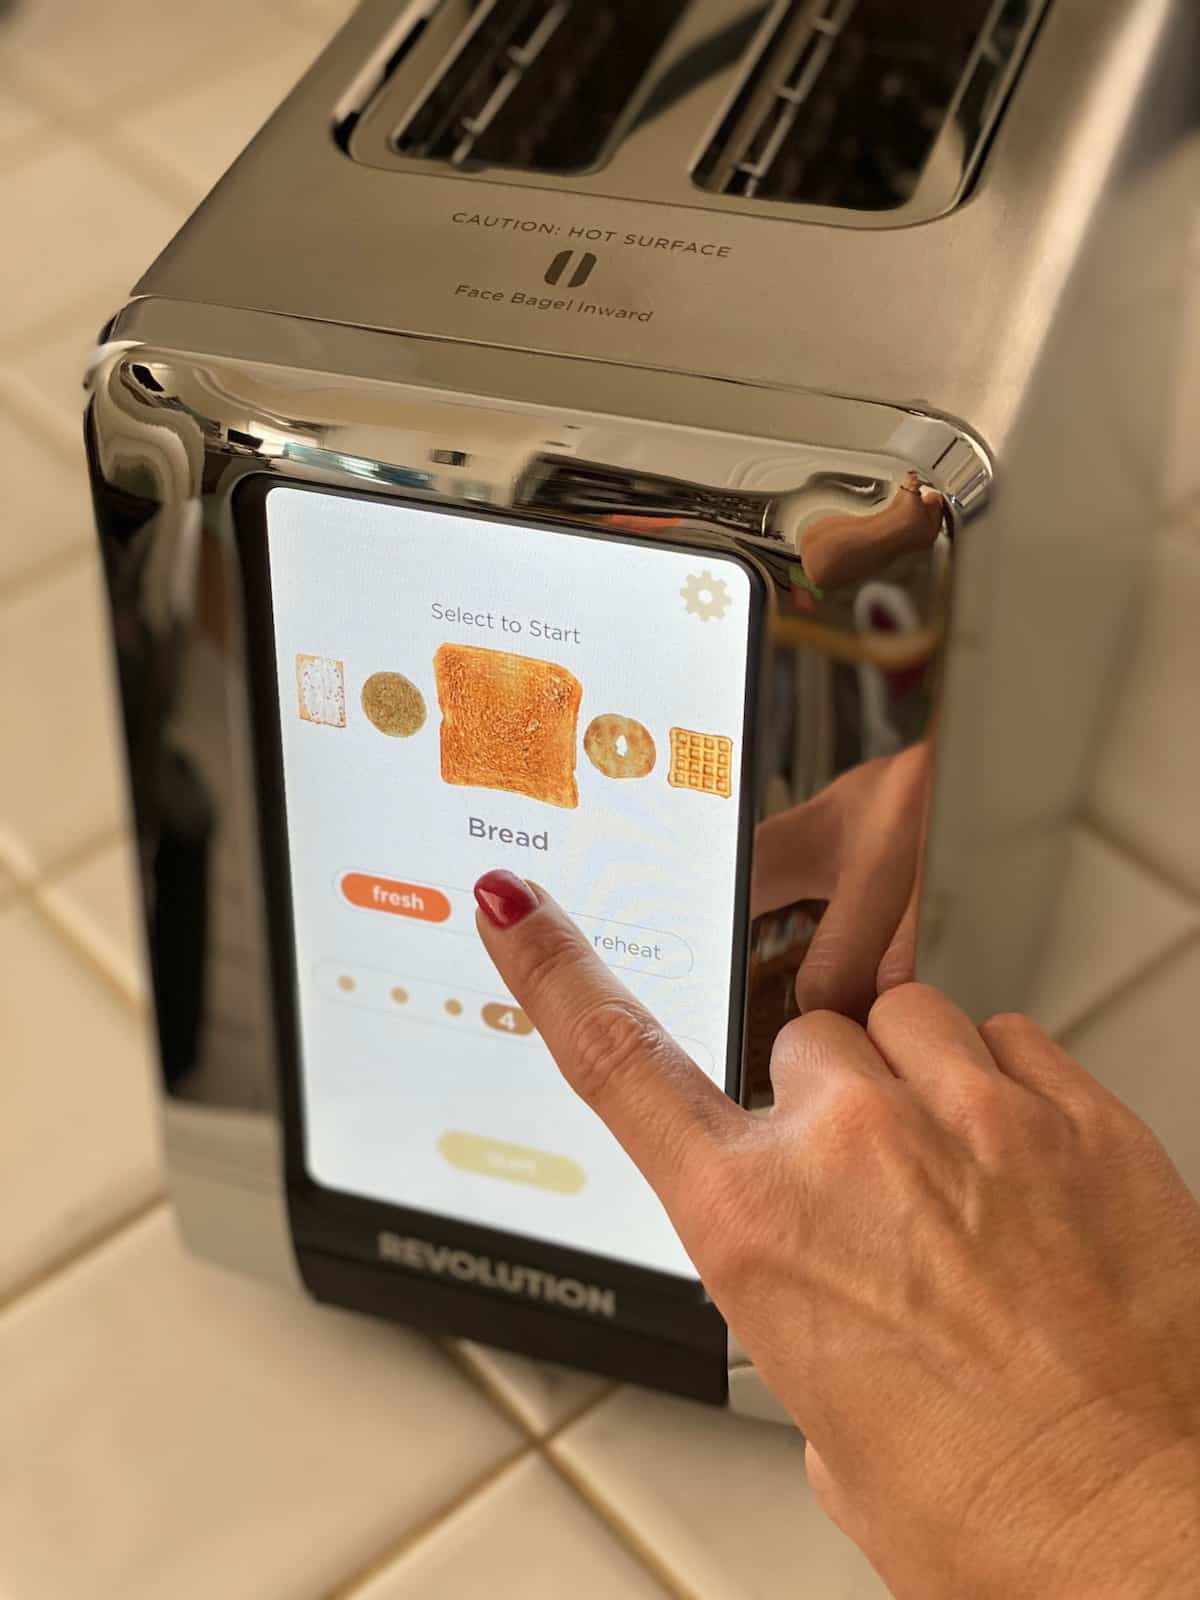 https://healthyvoyager.com/wp-content/uploads/2019/11/Revolution-Cooking-R180-High-Speed-Smart-Toaster-touchscreen.jpg